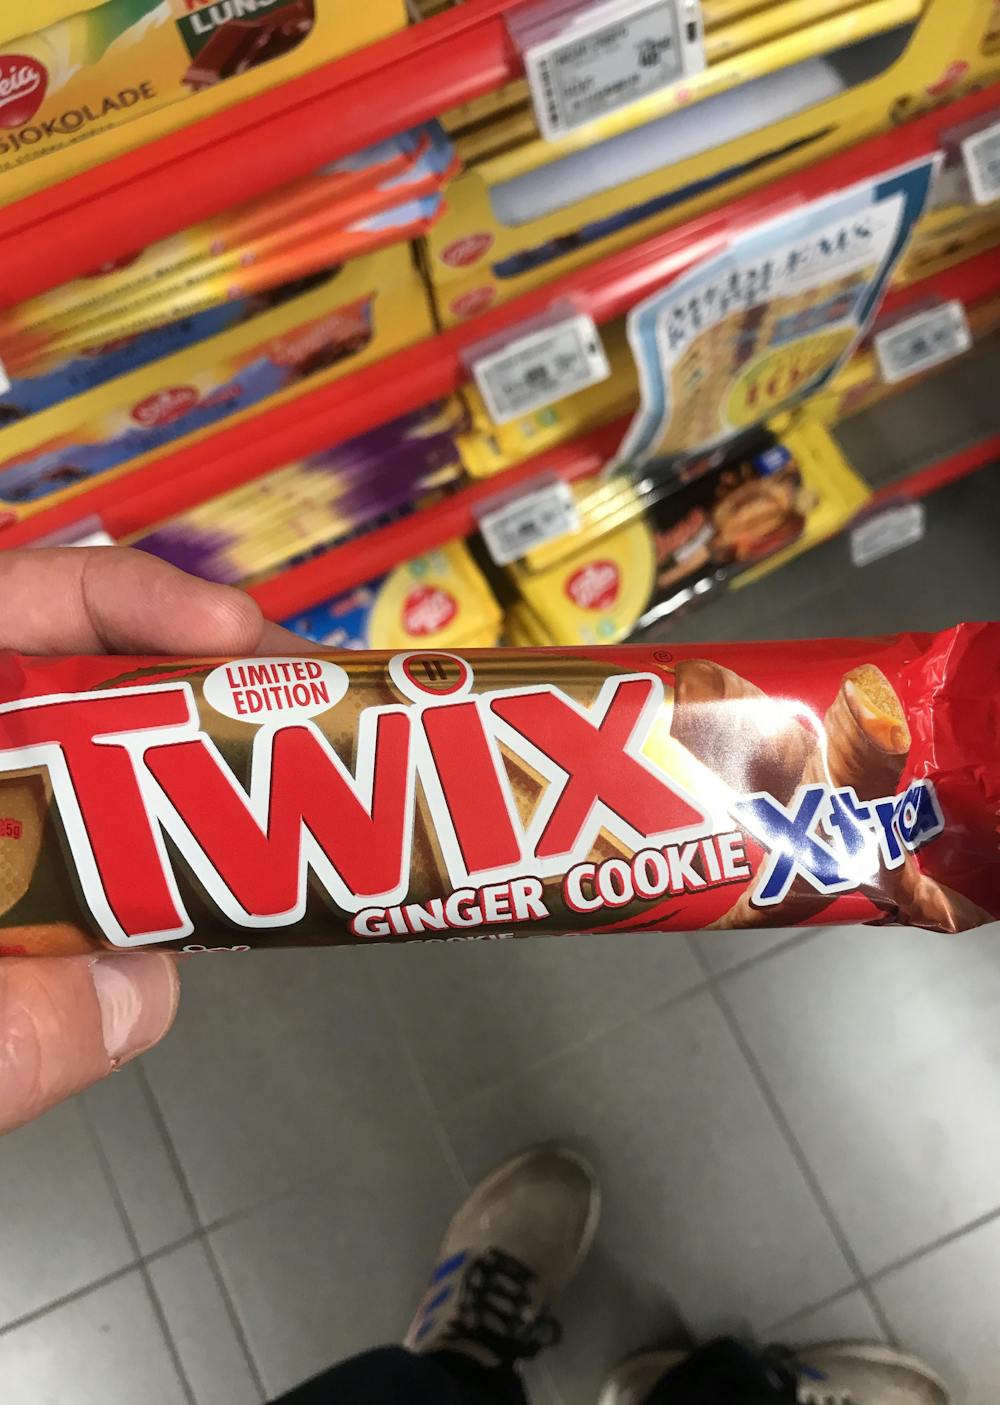 Ginger cookie xtra, Twix